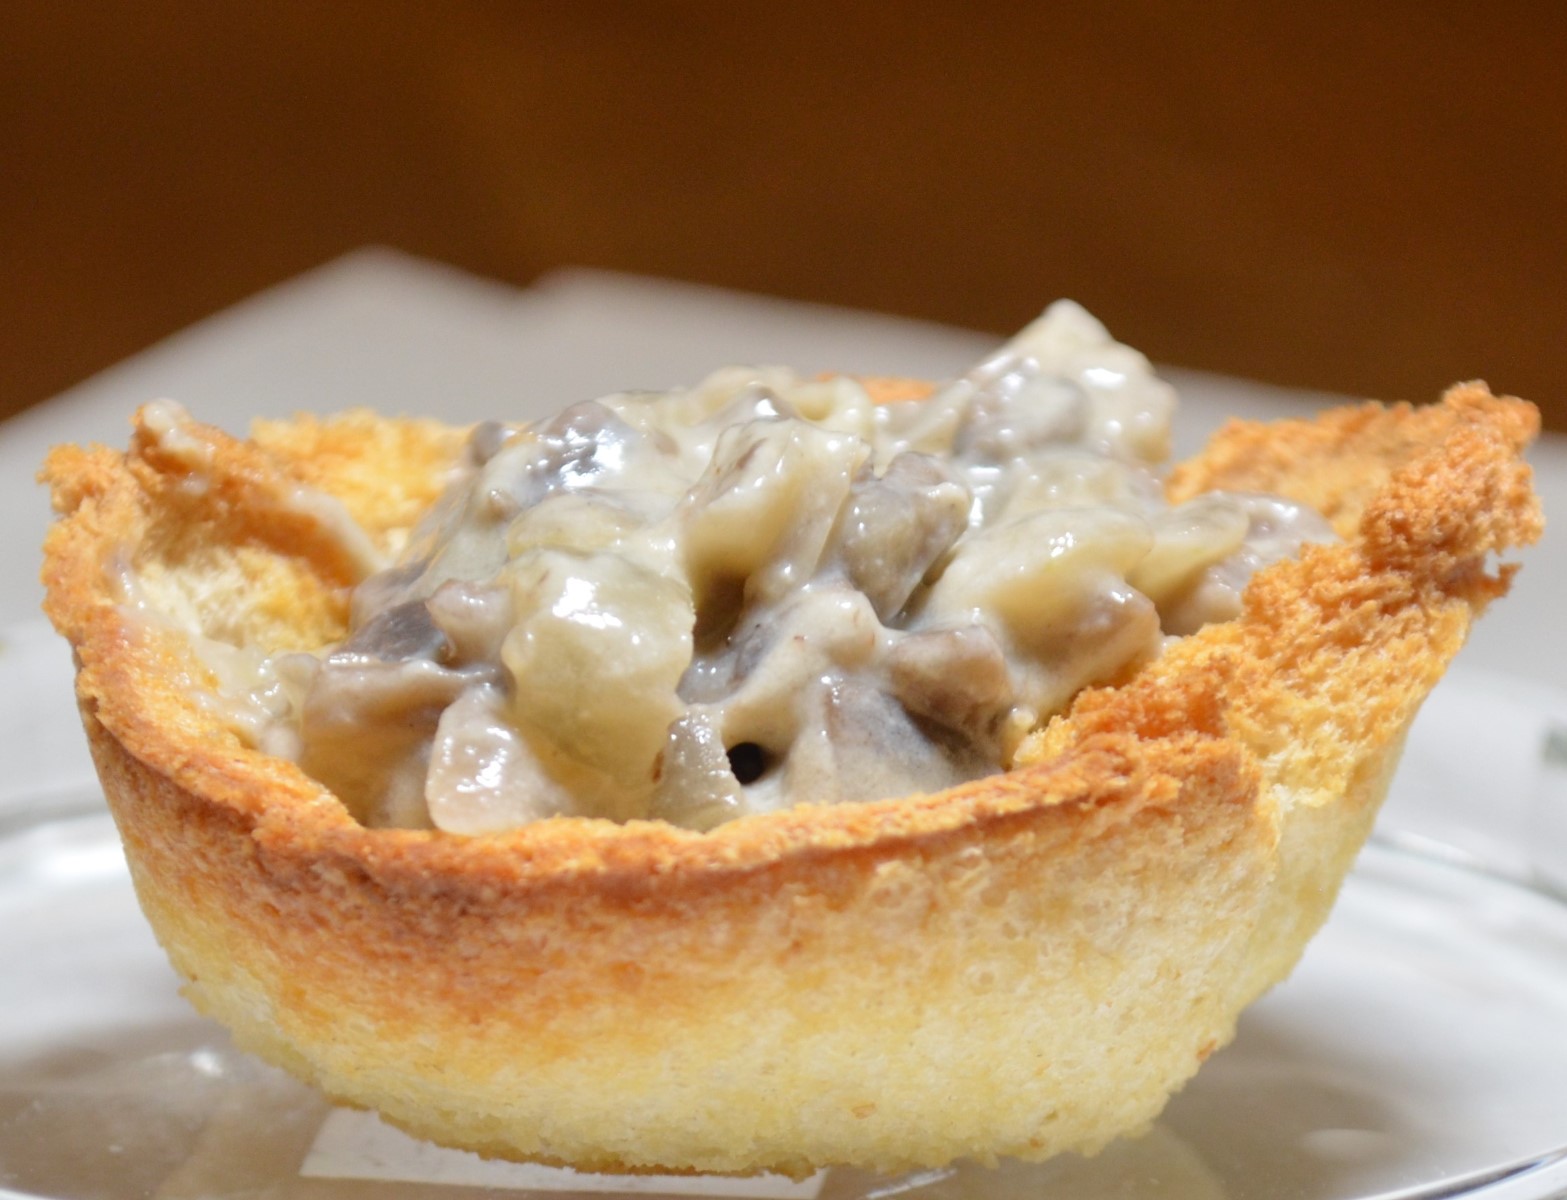 A single breadcup filled with creamed mushrooms on a plate.